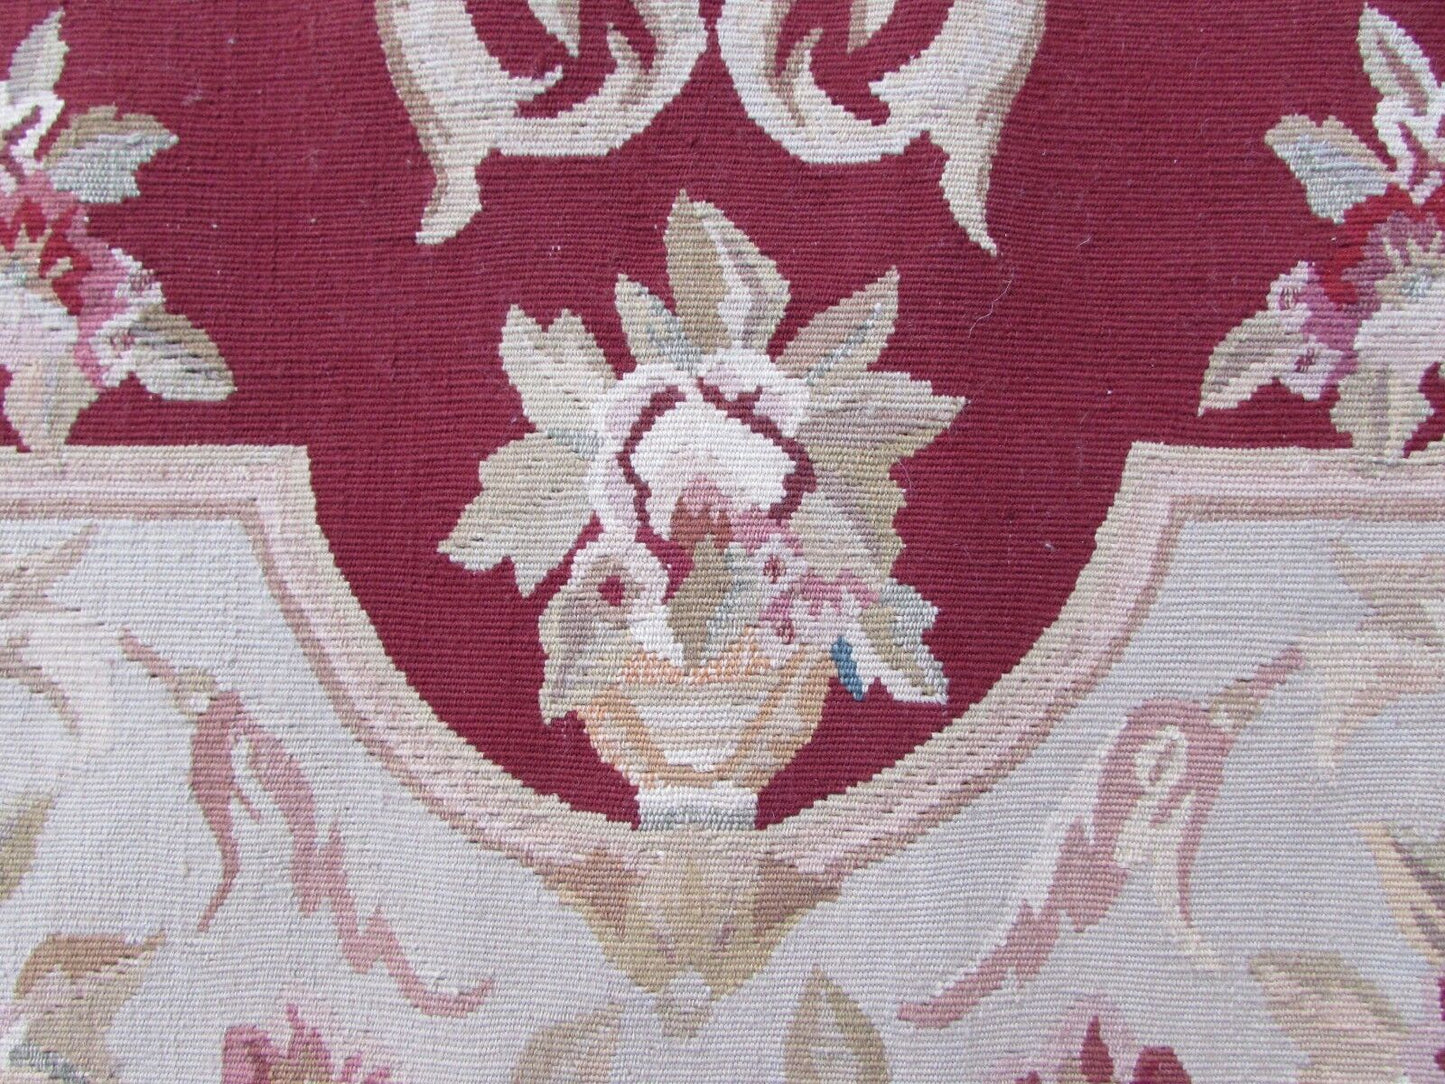 Handmade vintage French Aubusson rug in traditional design and in red and beige colors. The rug is from the end of 20th century in original good condition.